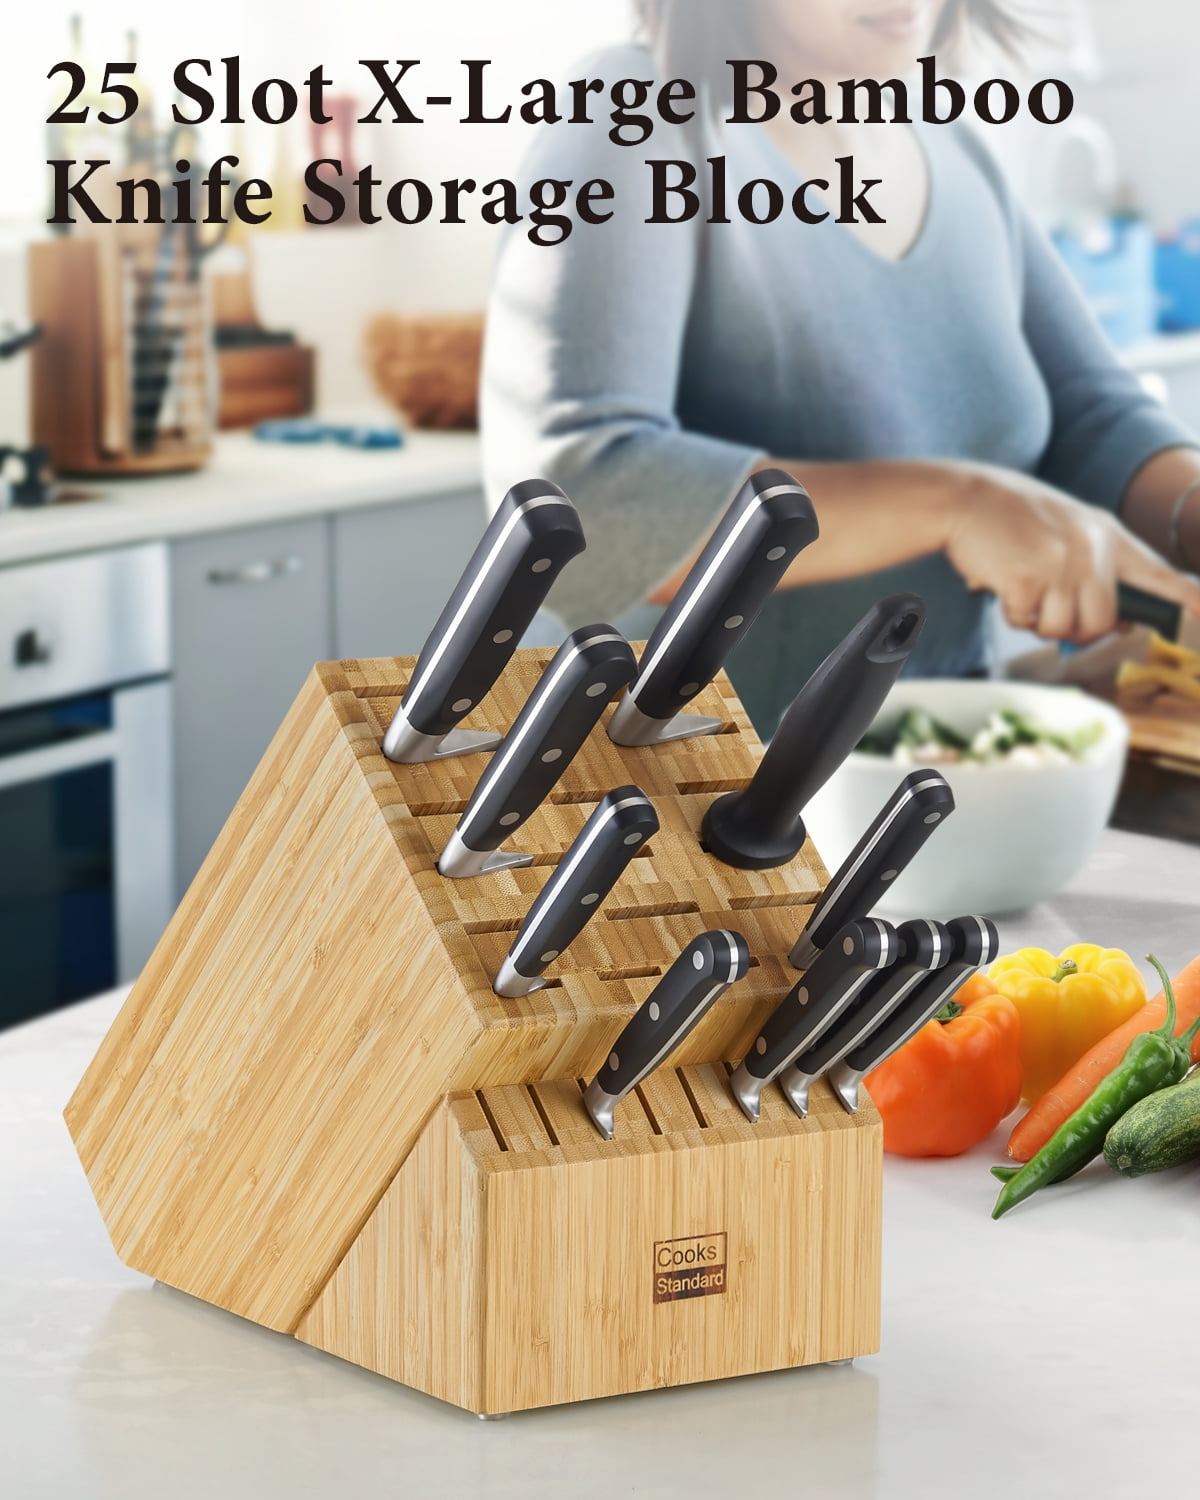 20 Slot Knife Block, Bamboo Knife Holder Without Knives - Deluxe Countertop  Knife Stand-Hold Multiple Large Blade Knives, Wider Slots for Easier - by